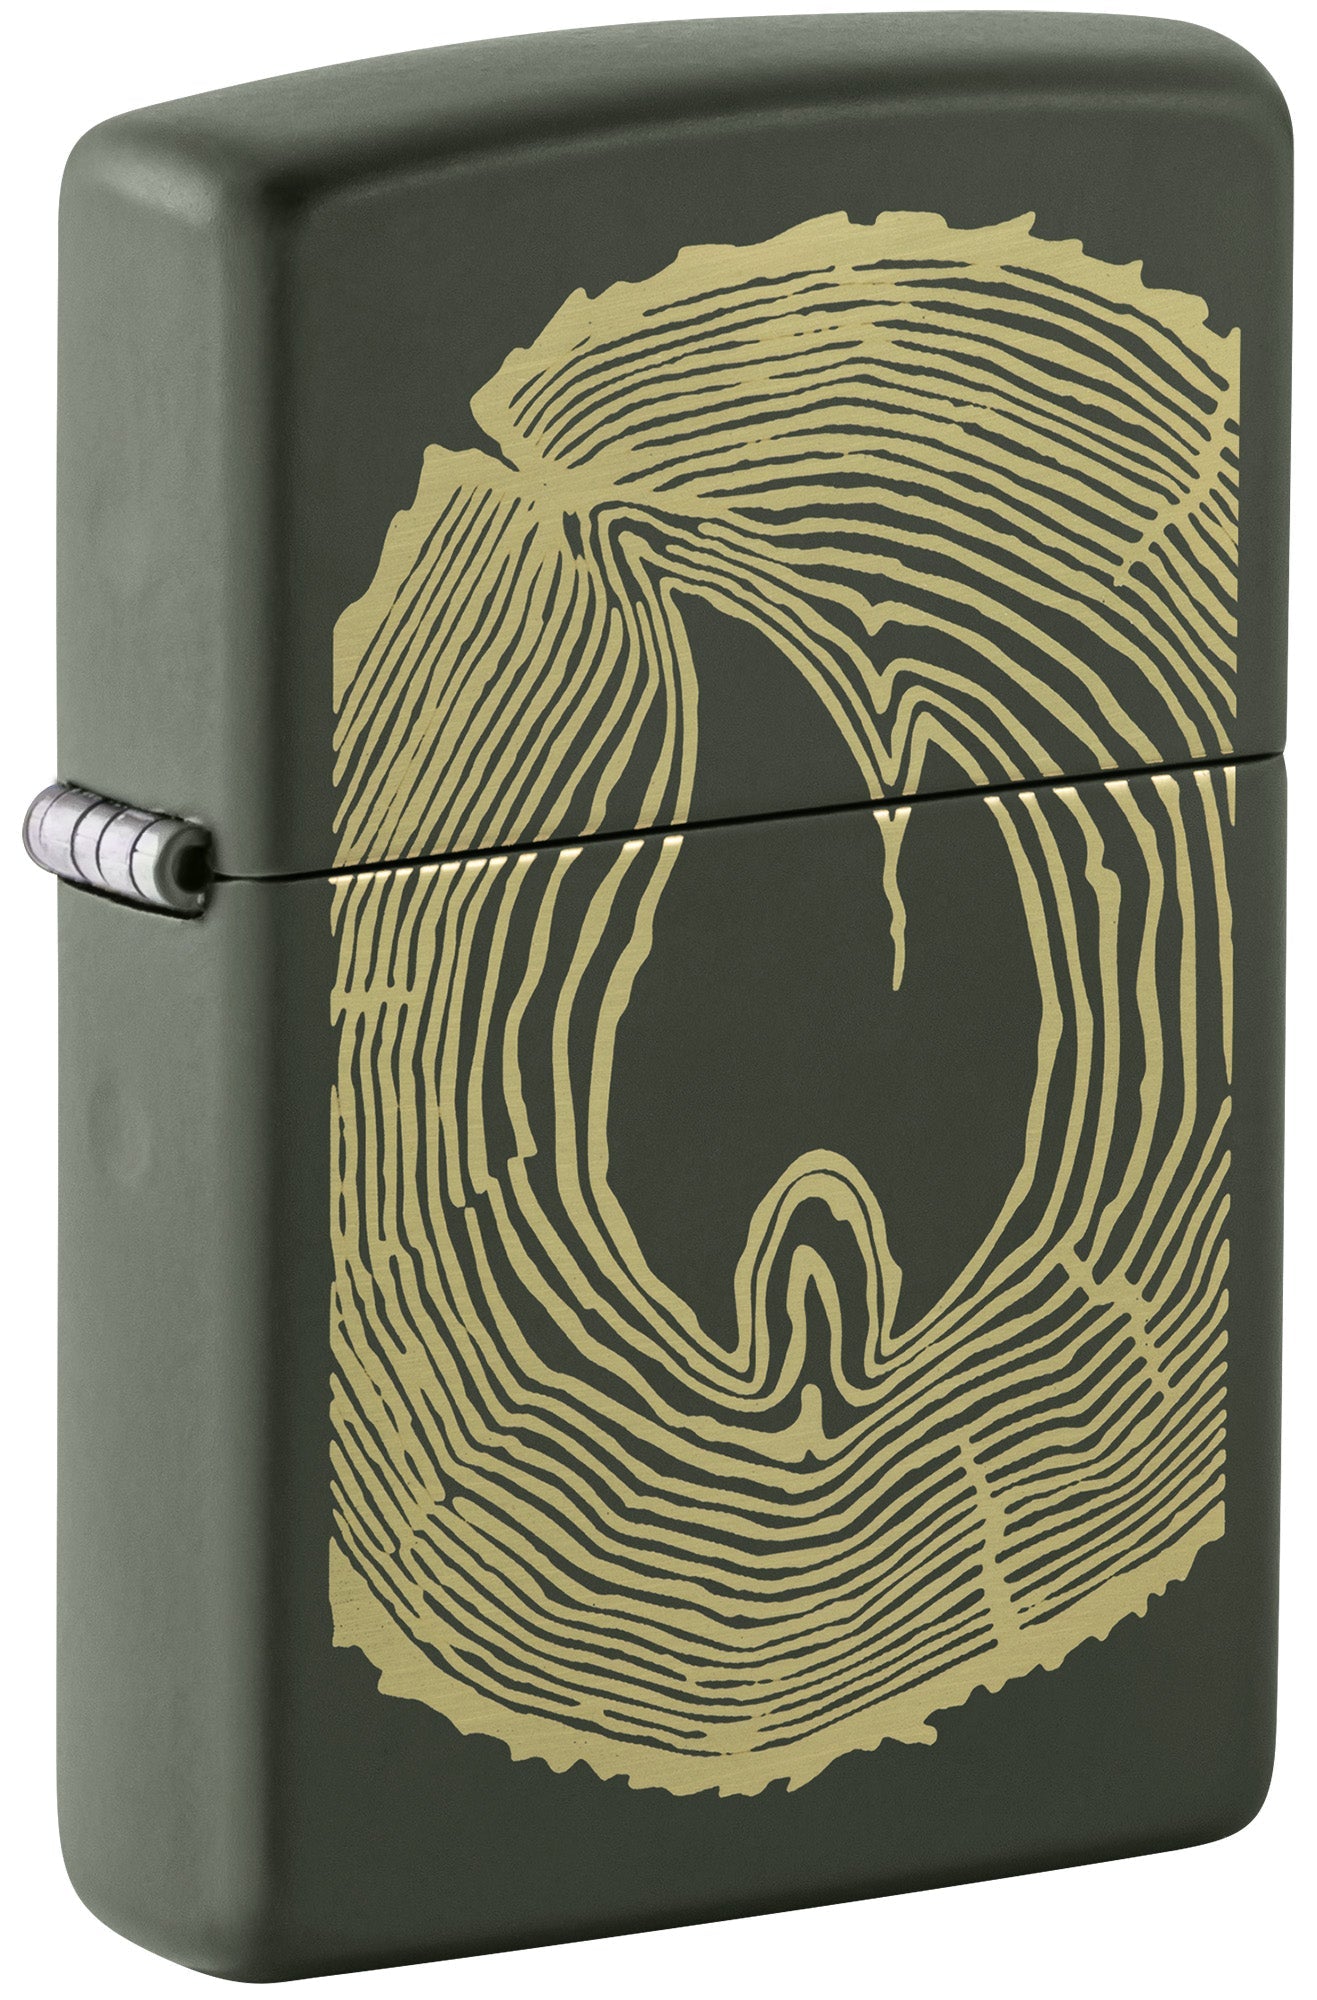 Zippo Lighter: Wood Rings with Flame, Engraved - Green Matte 48959